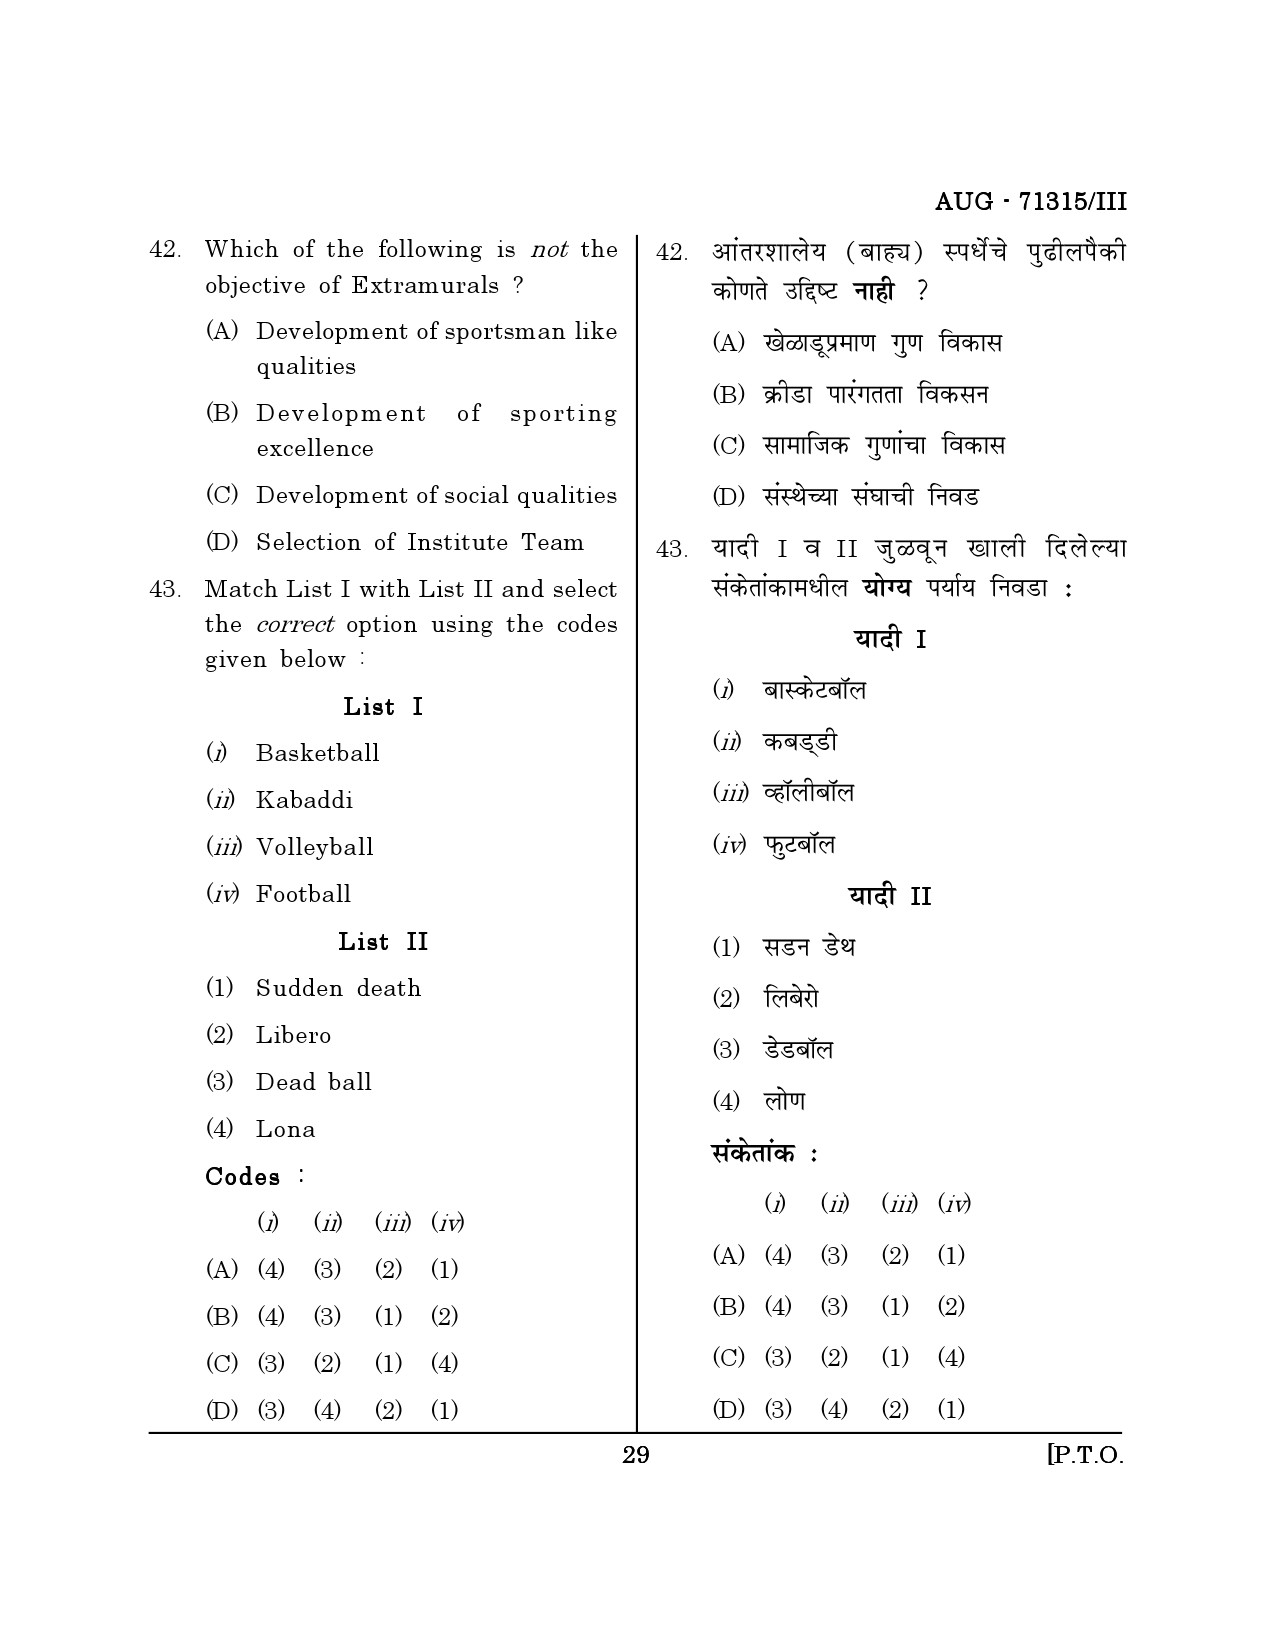 Maharashtra SET Physical Education Question Paper III August 2015 28